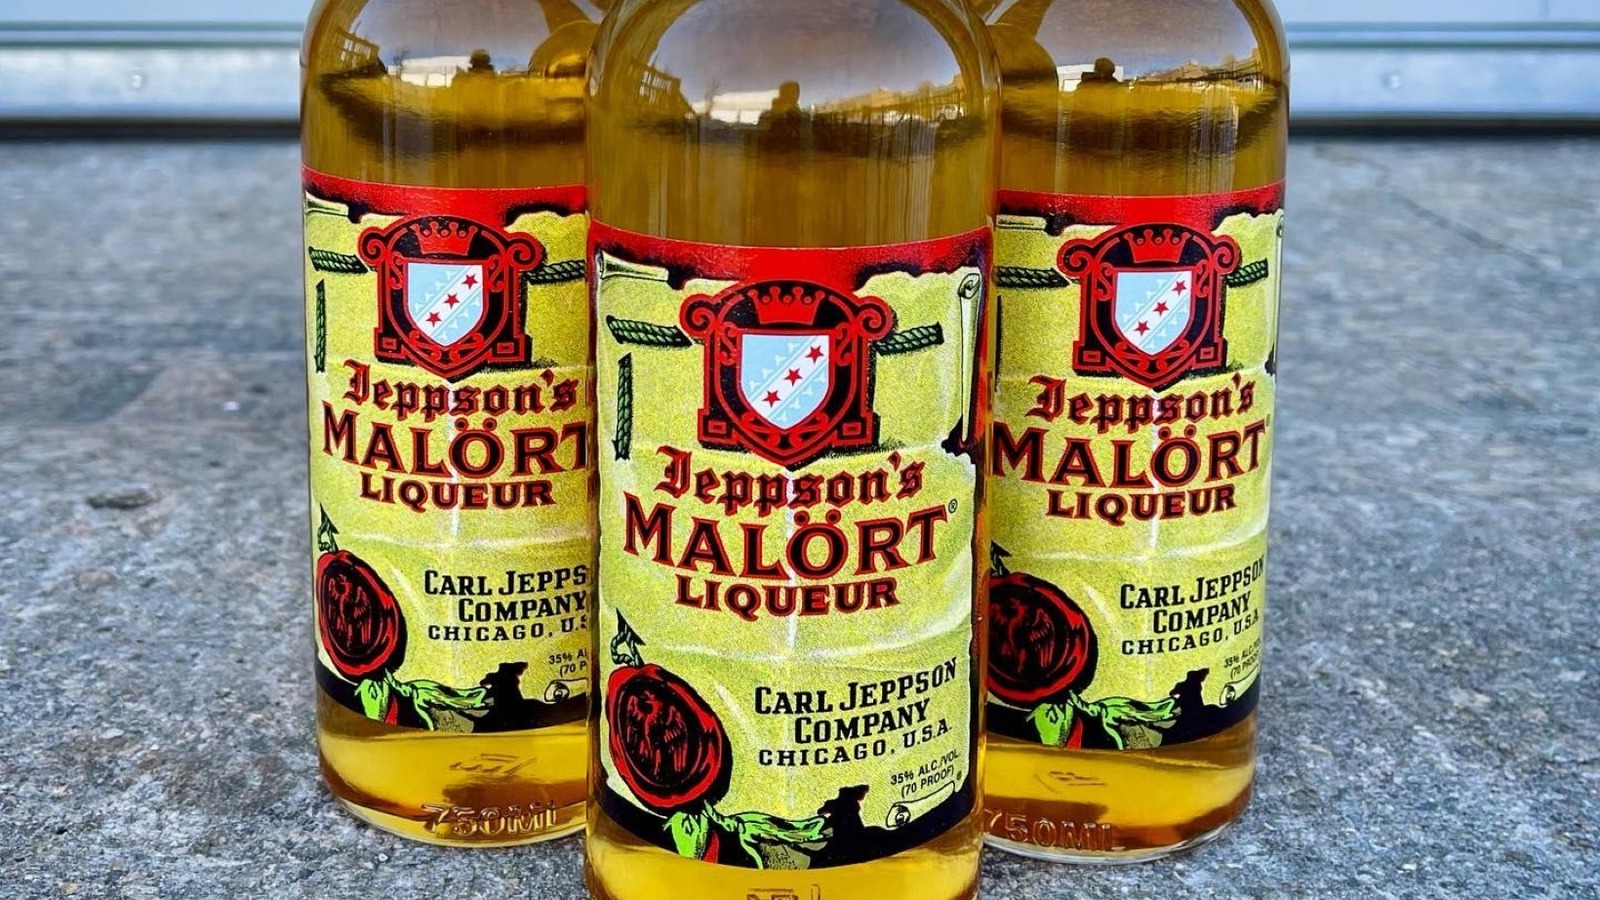 Chicago's Malört Liquor Is Famous For All The Wrong Reasons